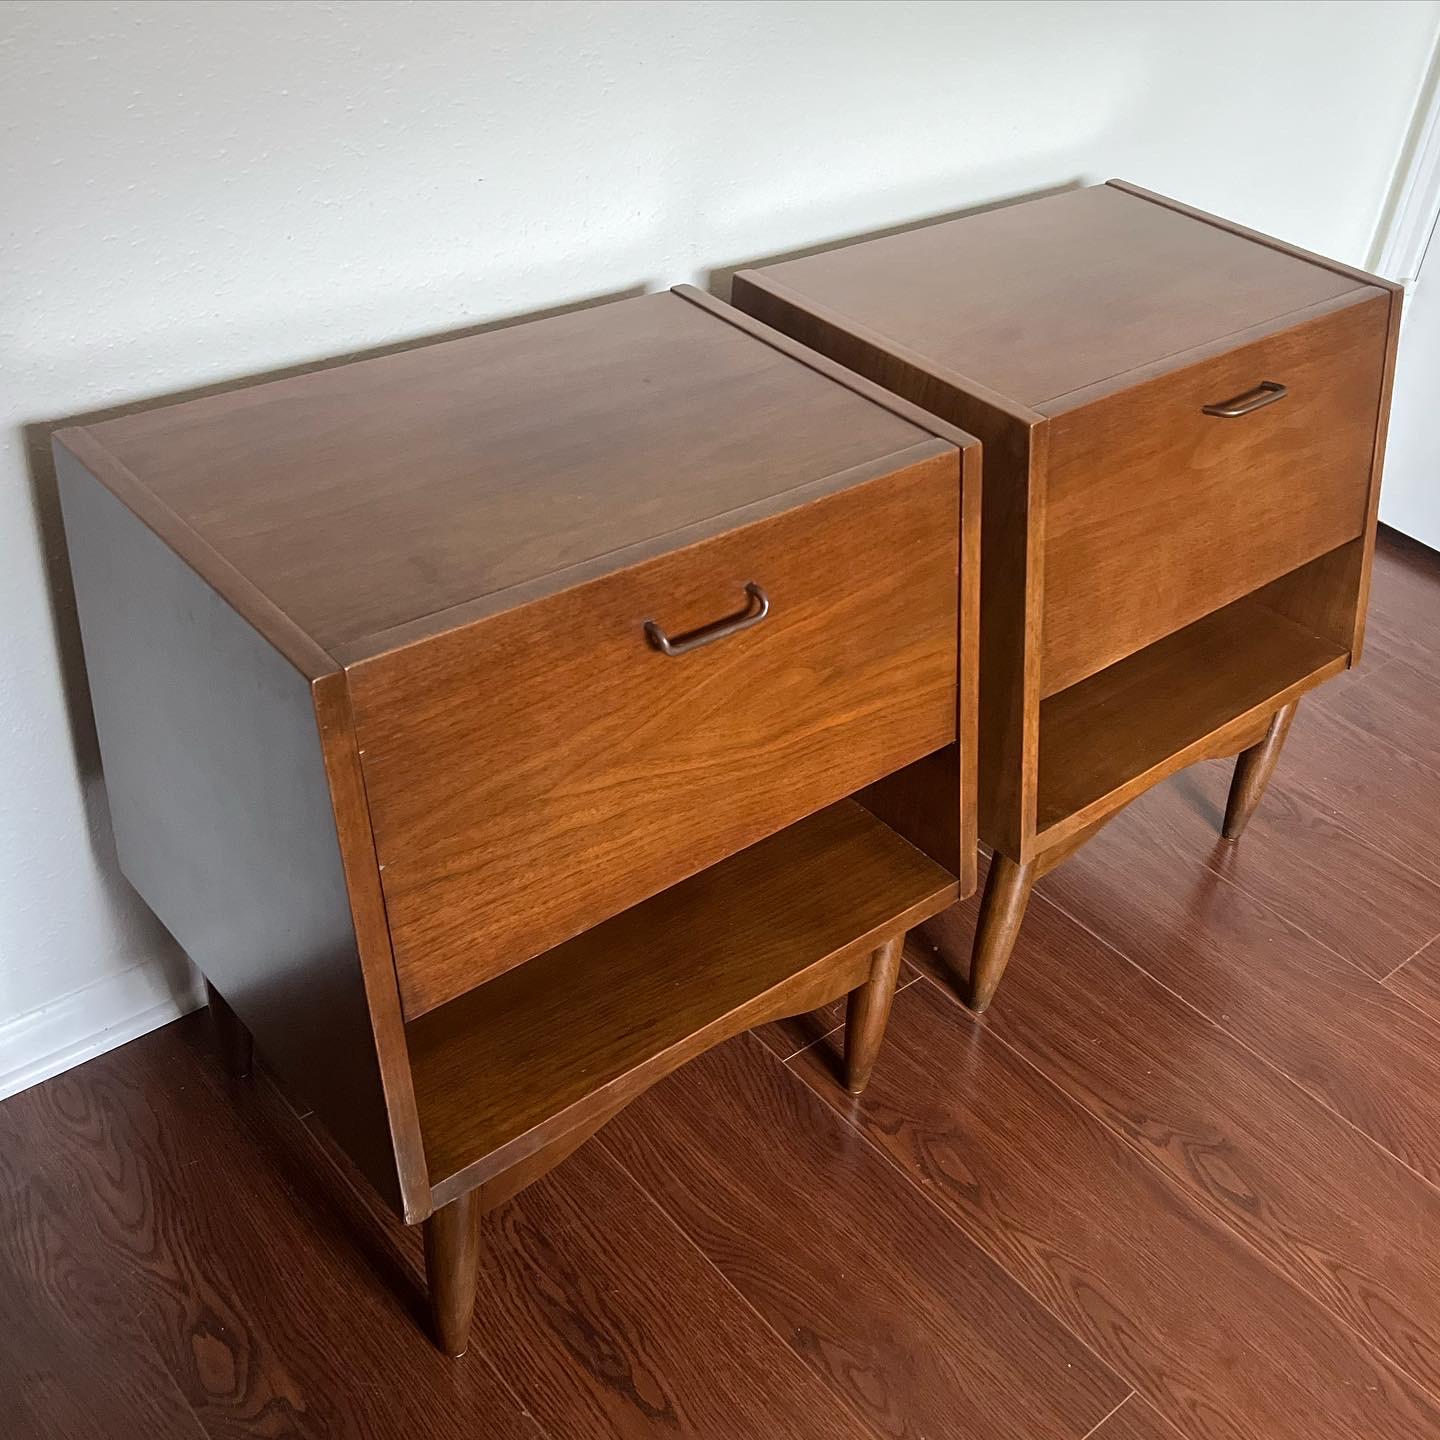 These Mid-Century Modern nightstands by American of Martinsville feature a unique bedside array of storage behind the stylish drop front cabinet. Iconic vintage style and storage perfect for any bedroom setting. In excellent condition.